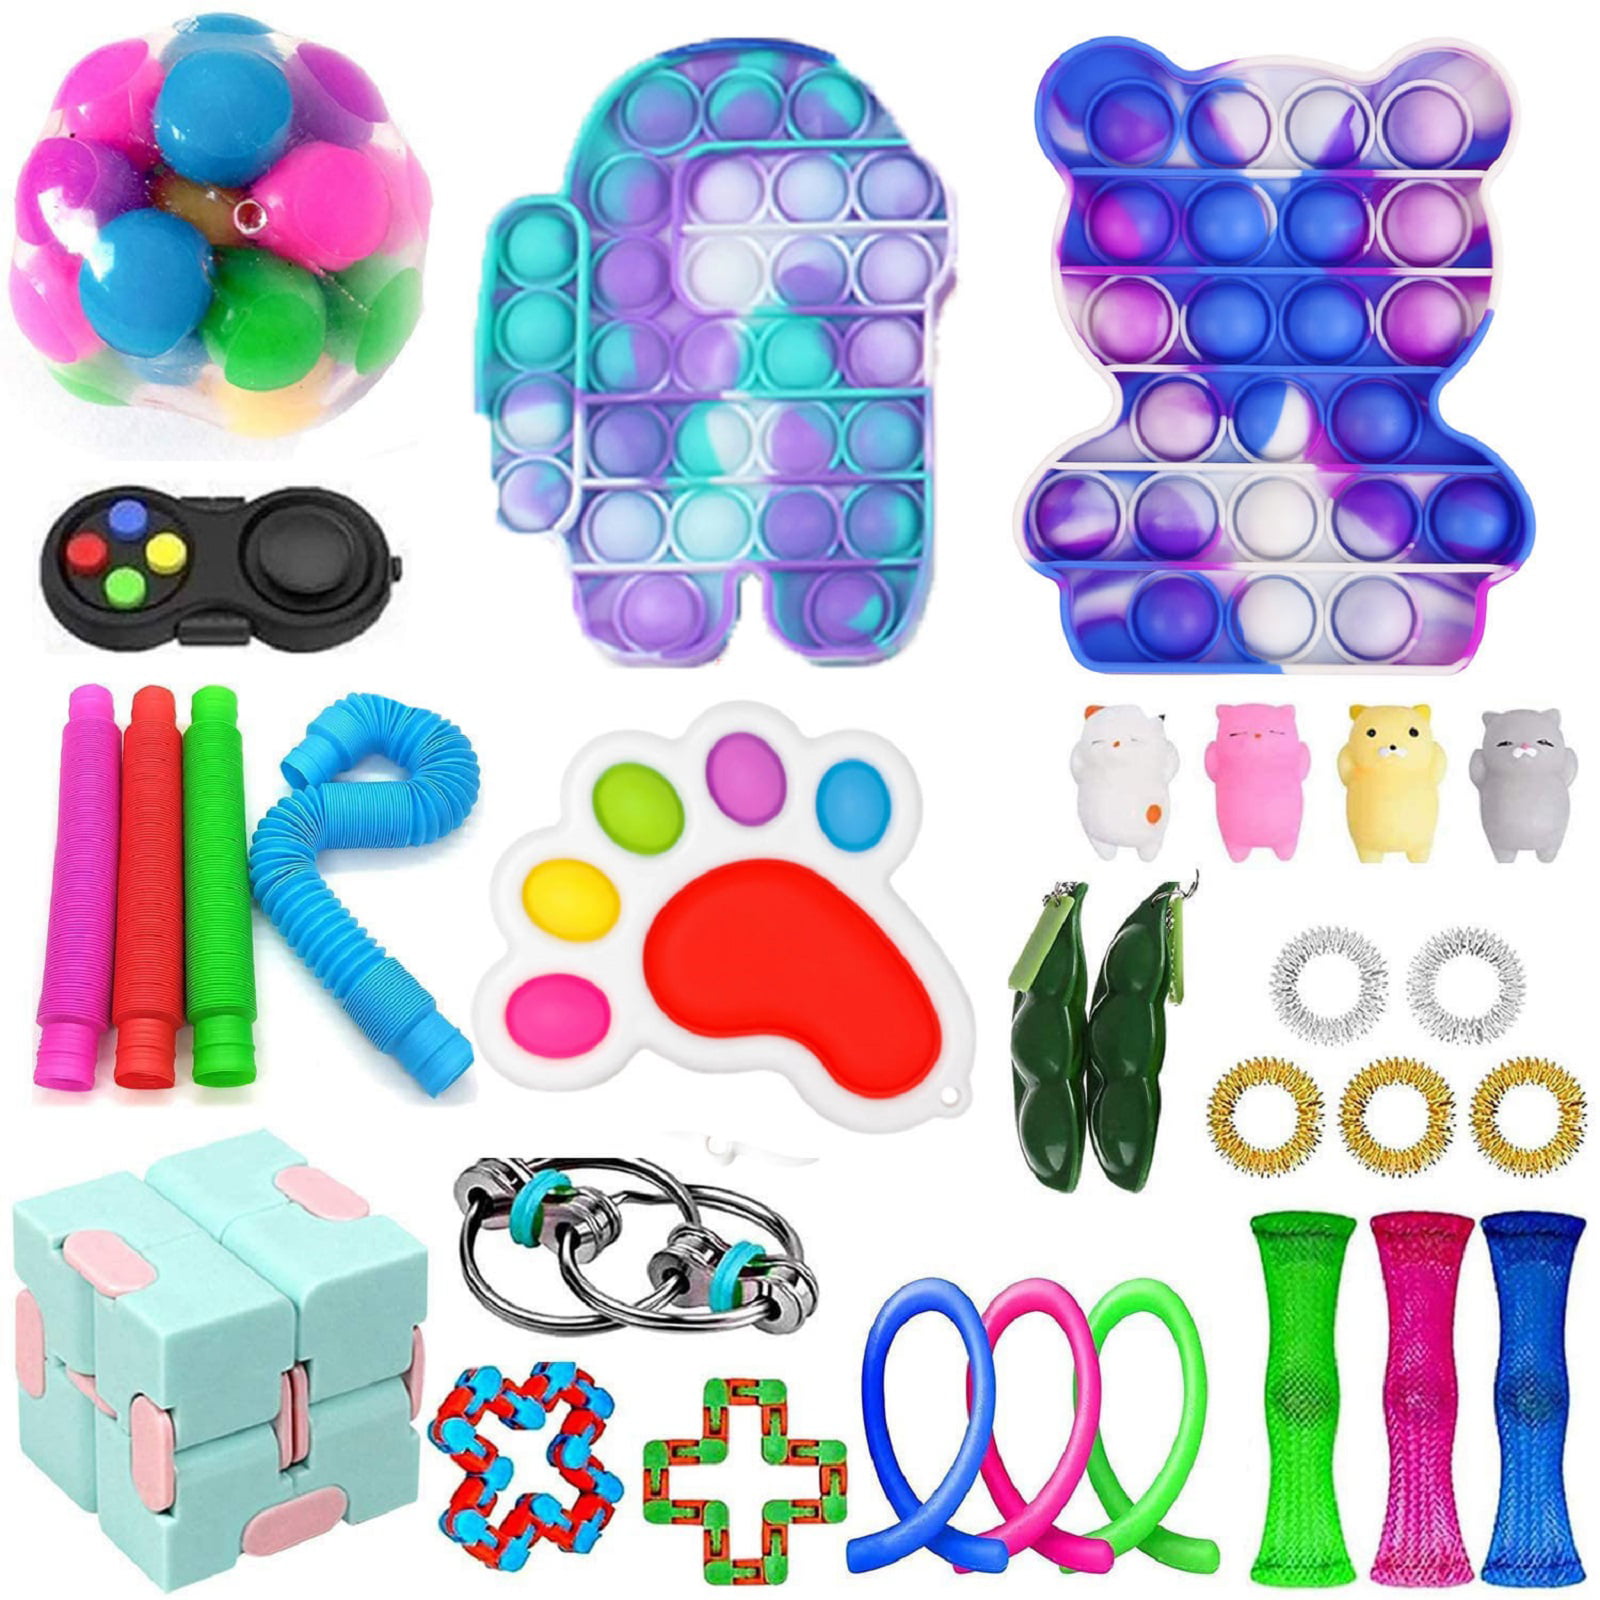 Details about   50pcs Pack Fidget Sensory Toy Set Stress Relief Toys Autism Anxiety Relief Kids